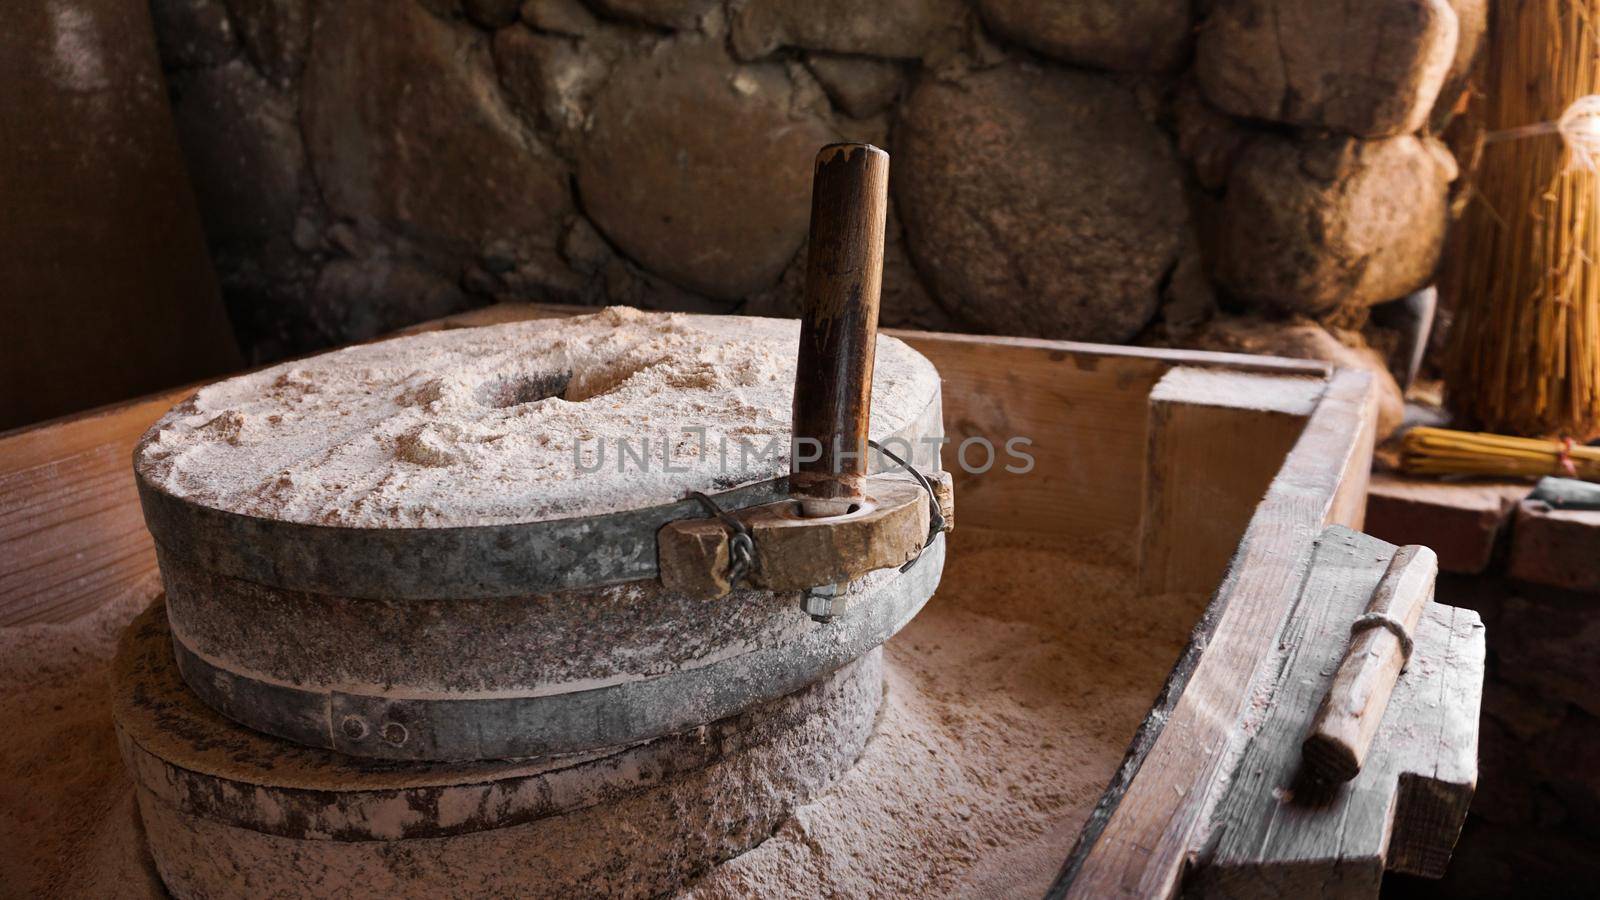 An ancient hand mill made of stones and wood. Flour grinding device by natali_brill